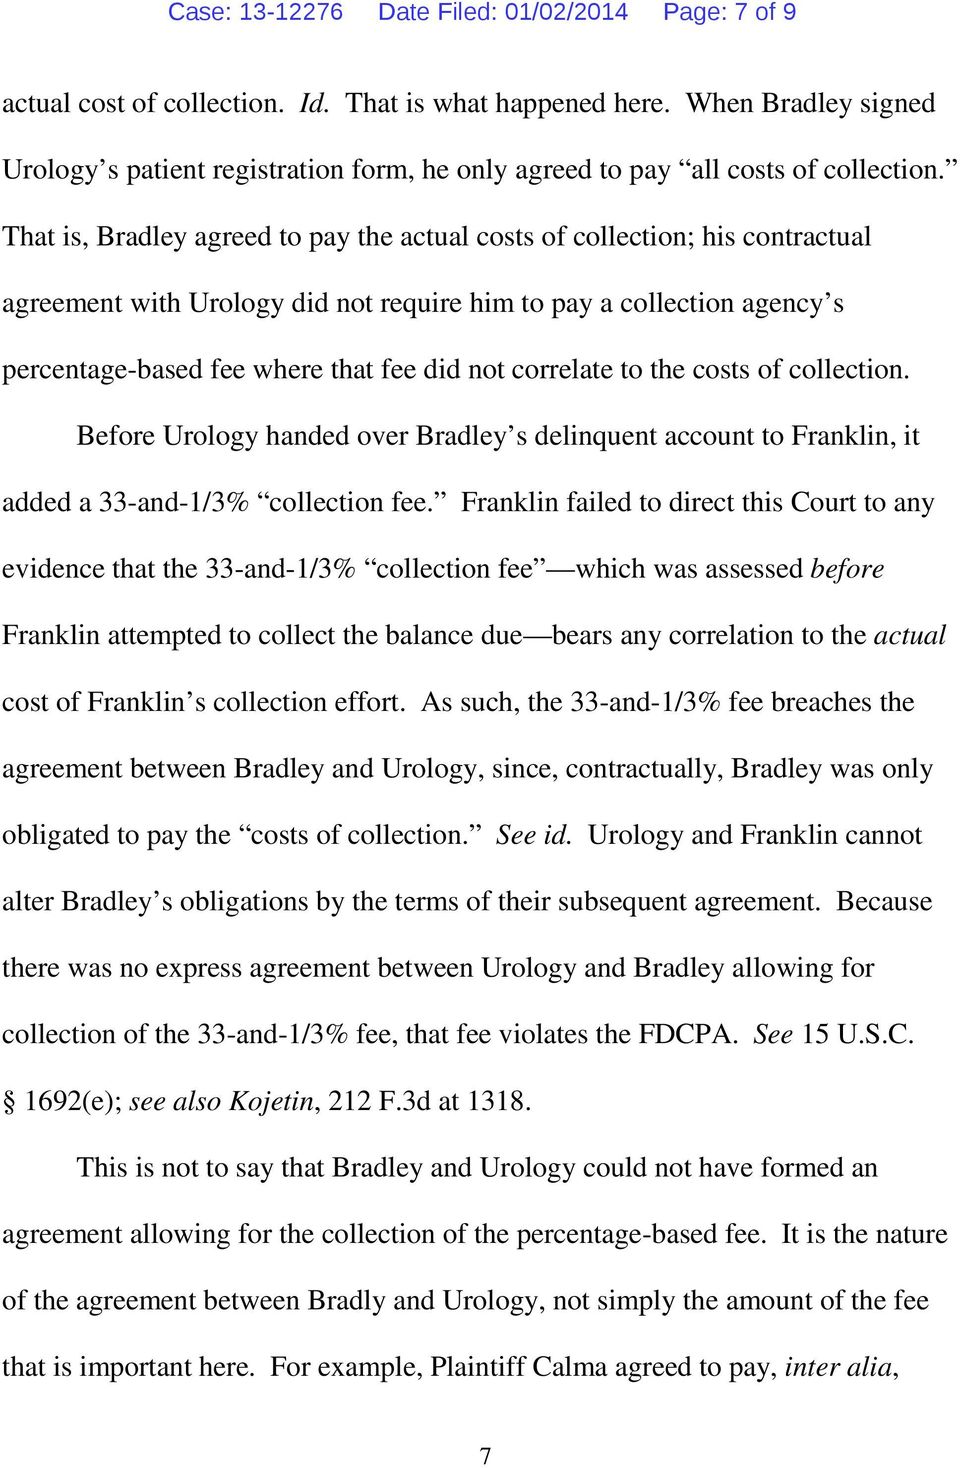 That is, Bradley agreed to pay the actual costs of collection; his contractual agreement with Urology did not require him to pay a collection agency s percentage-based fee where that fee did not